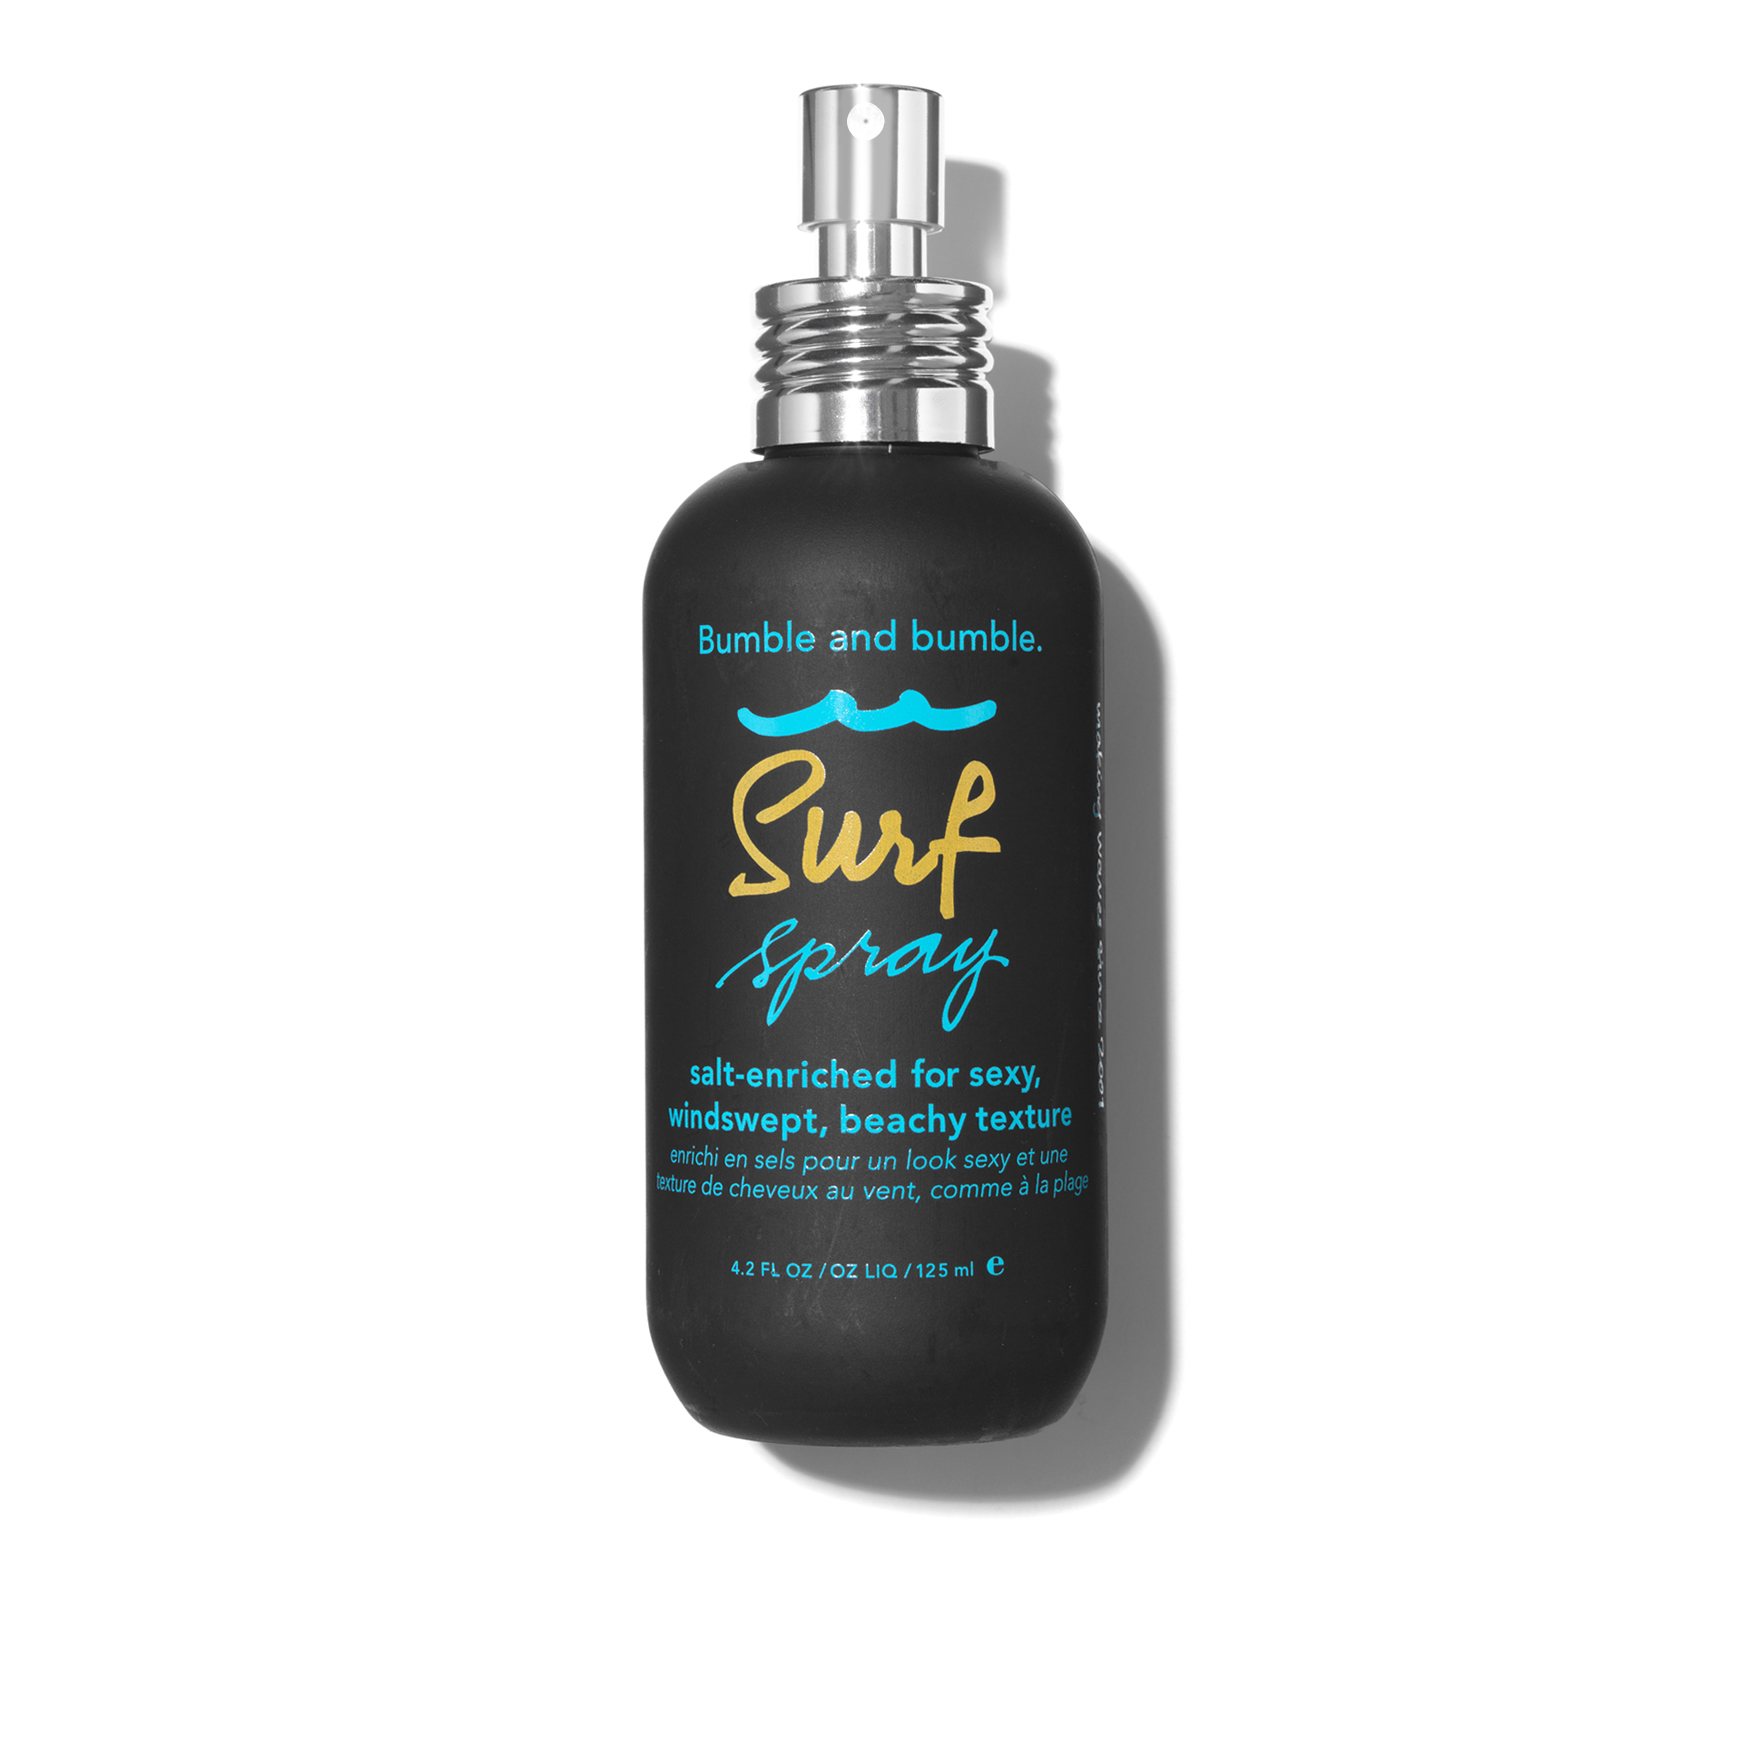 Bumble and Bumble Surf Spray | Space NK